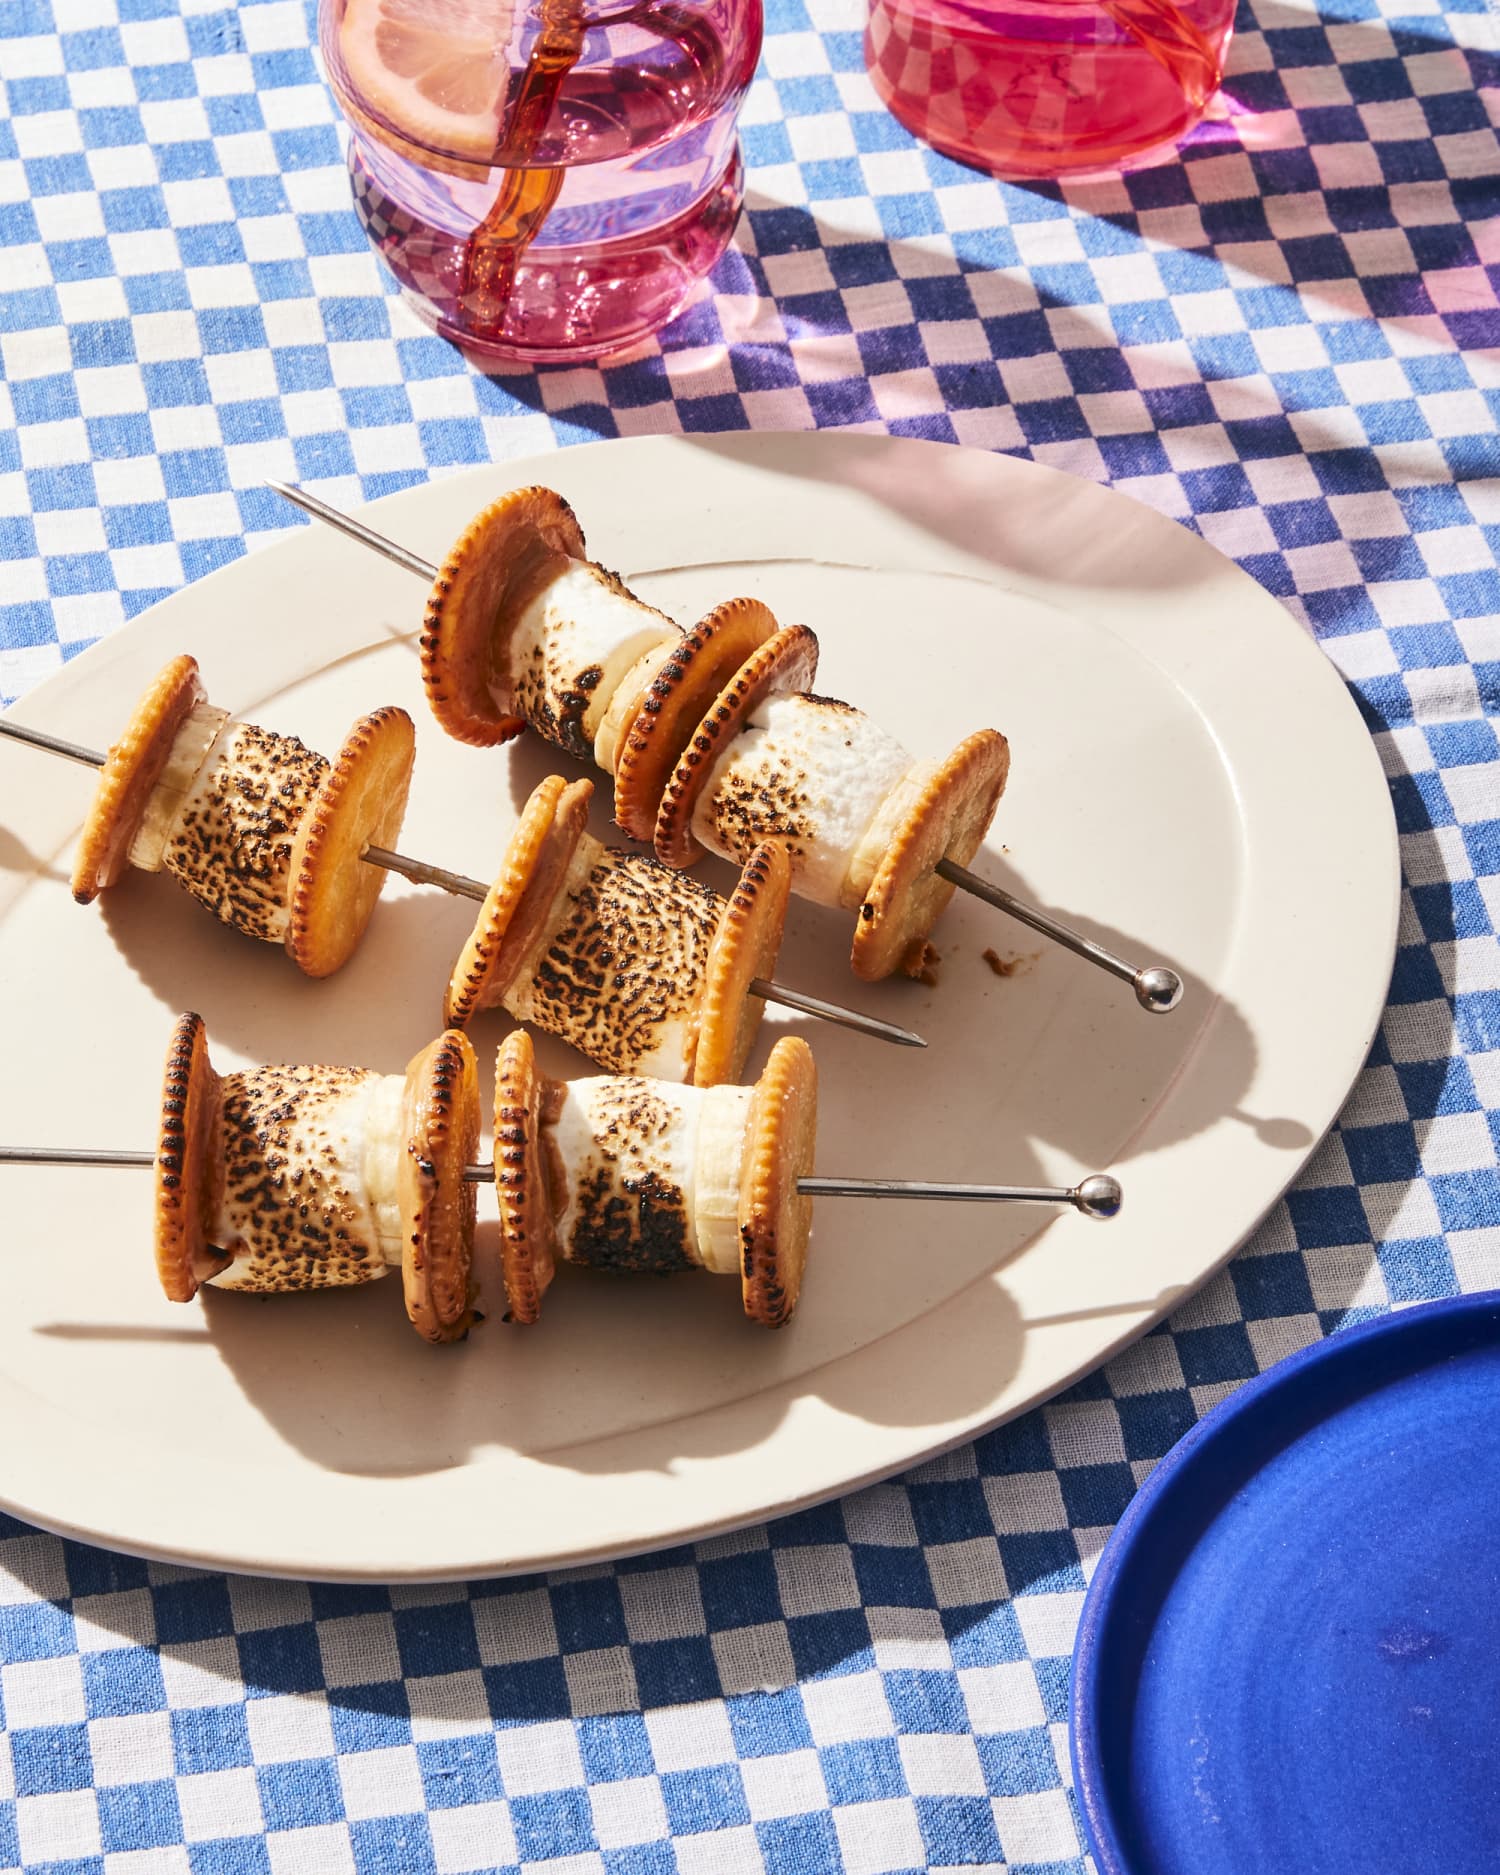 This Insane S’mores Recipe Is About to Go Viral